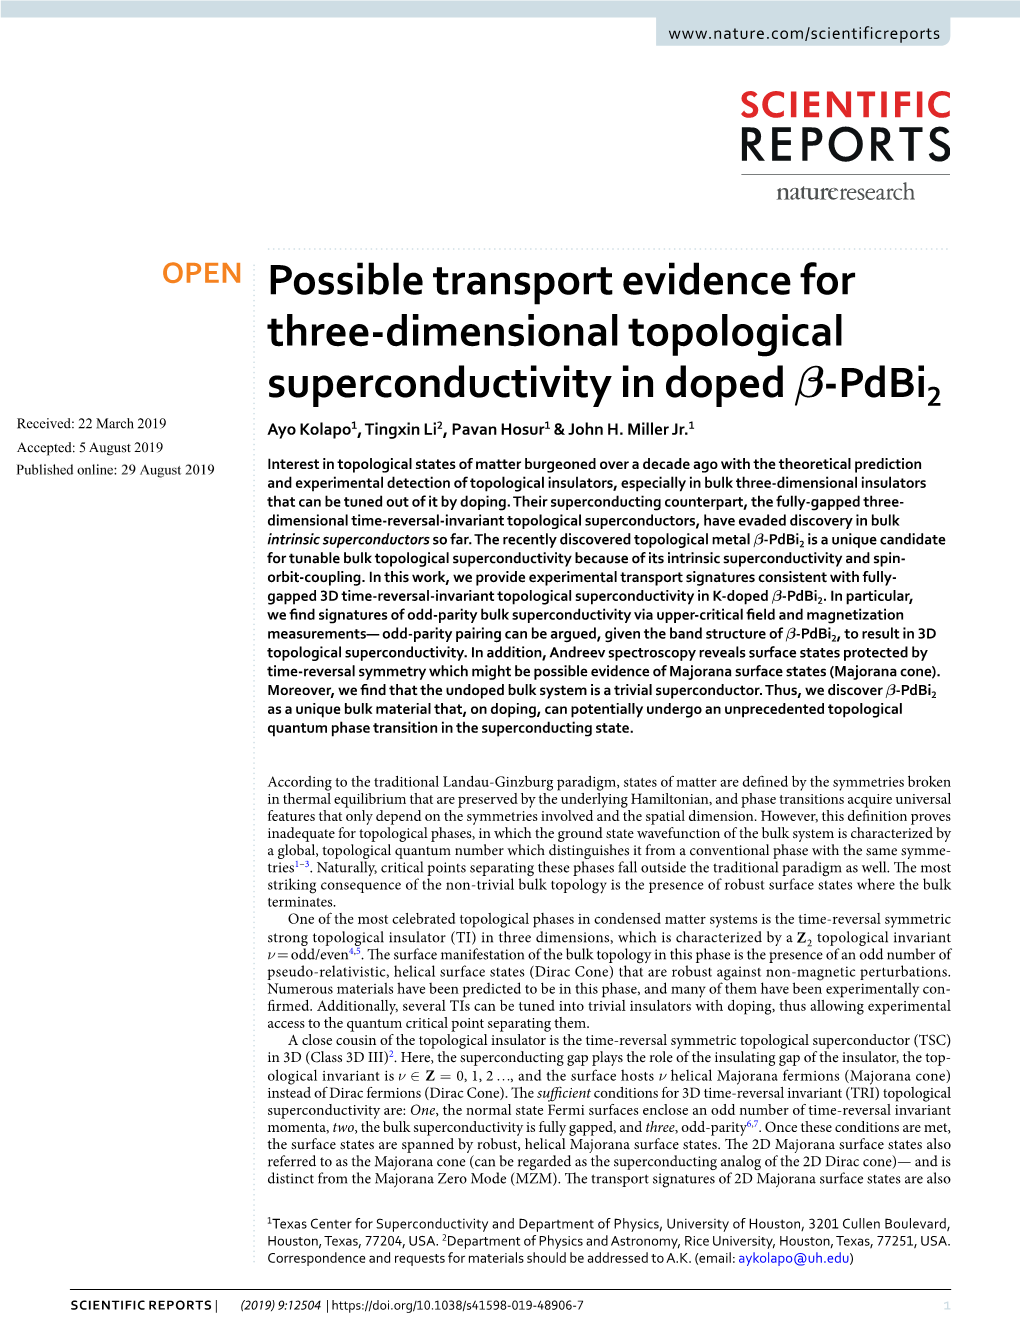 Possible Transport Evidence for Three-Dimensional Topological